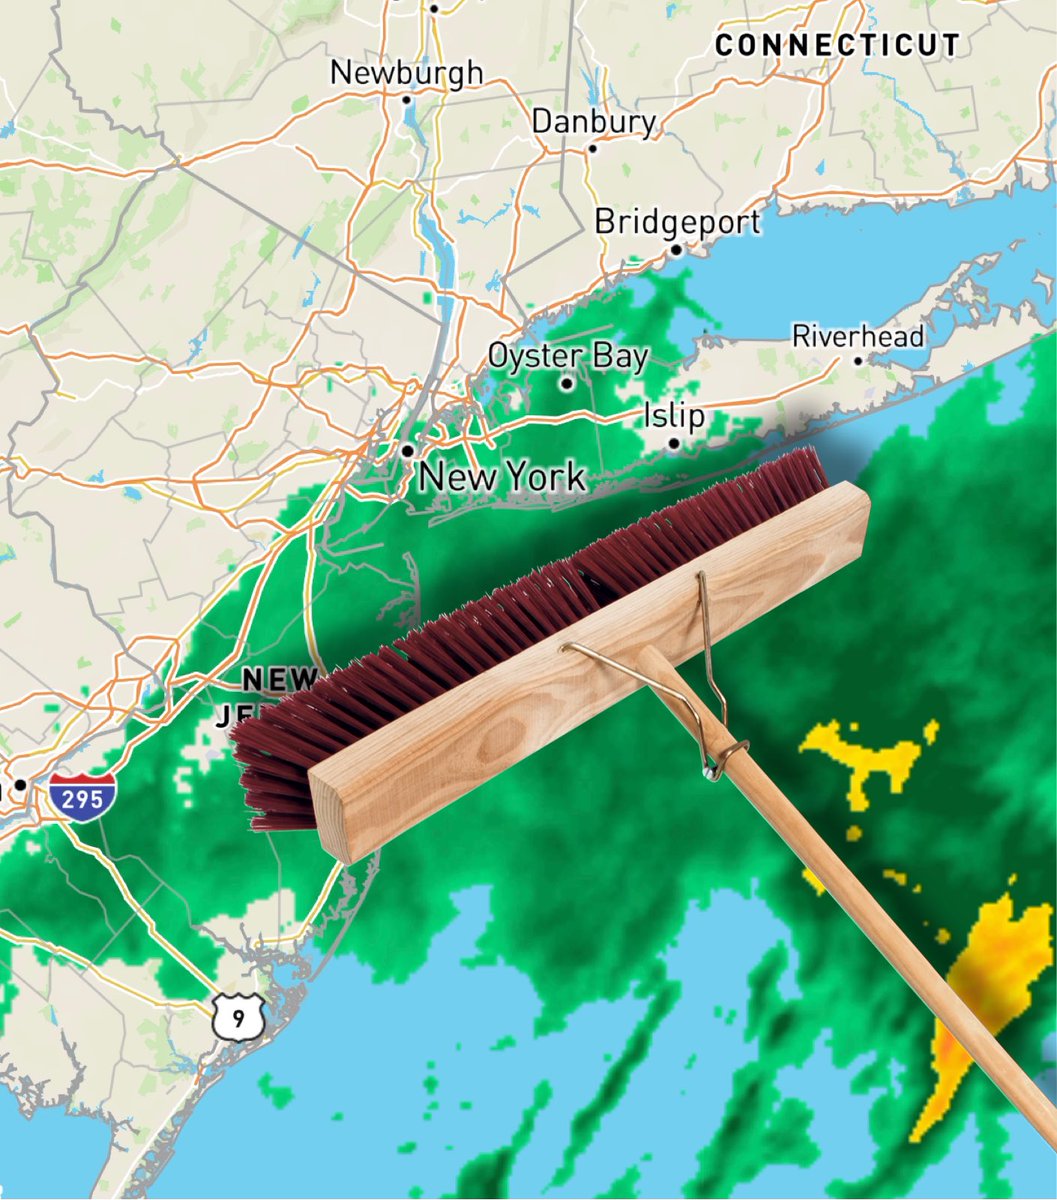 Here's the radar over New York for today